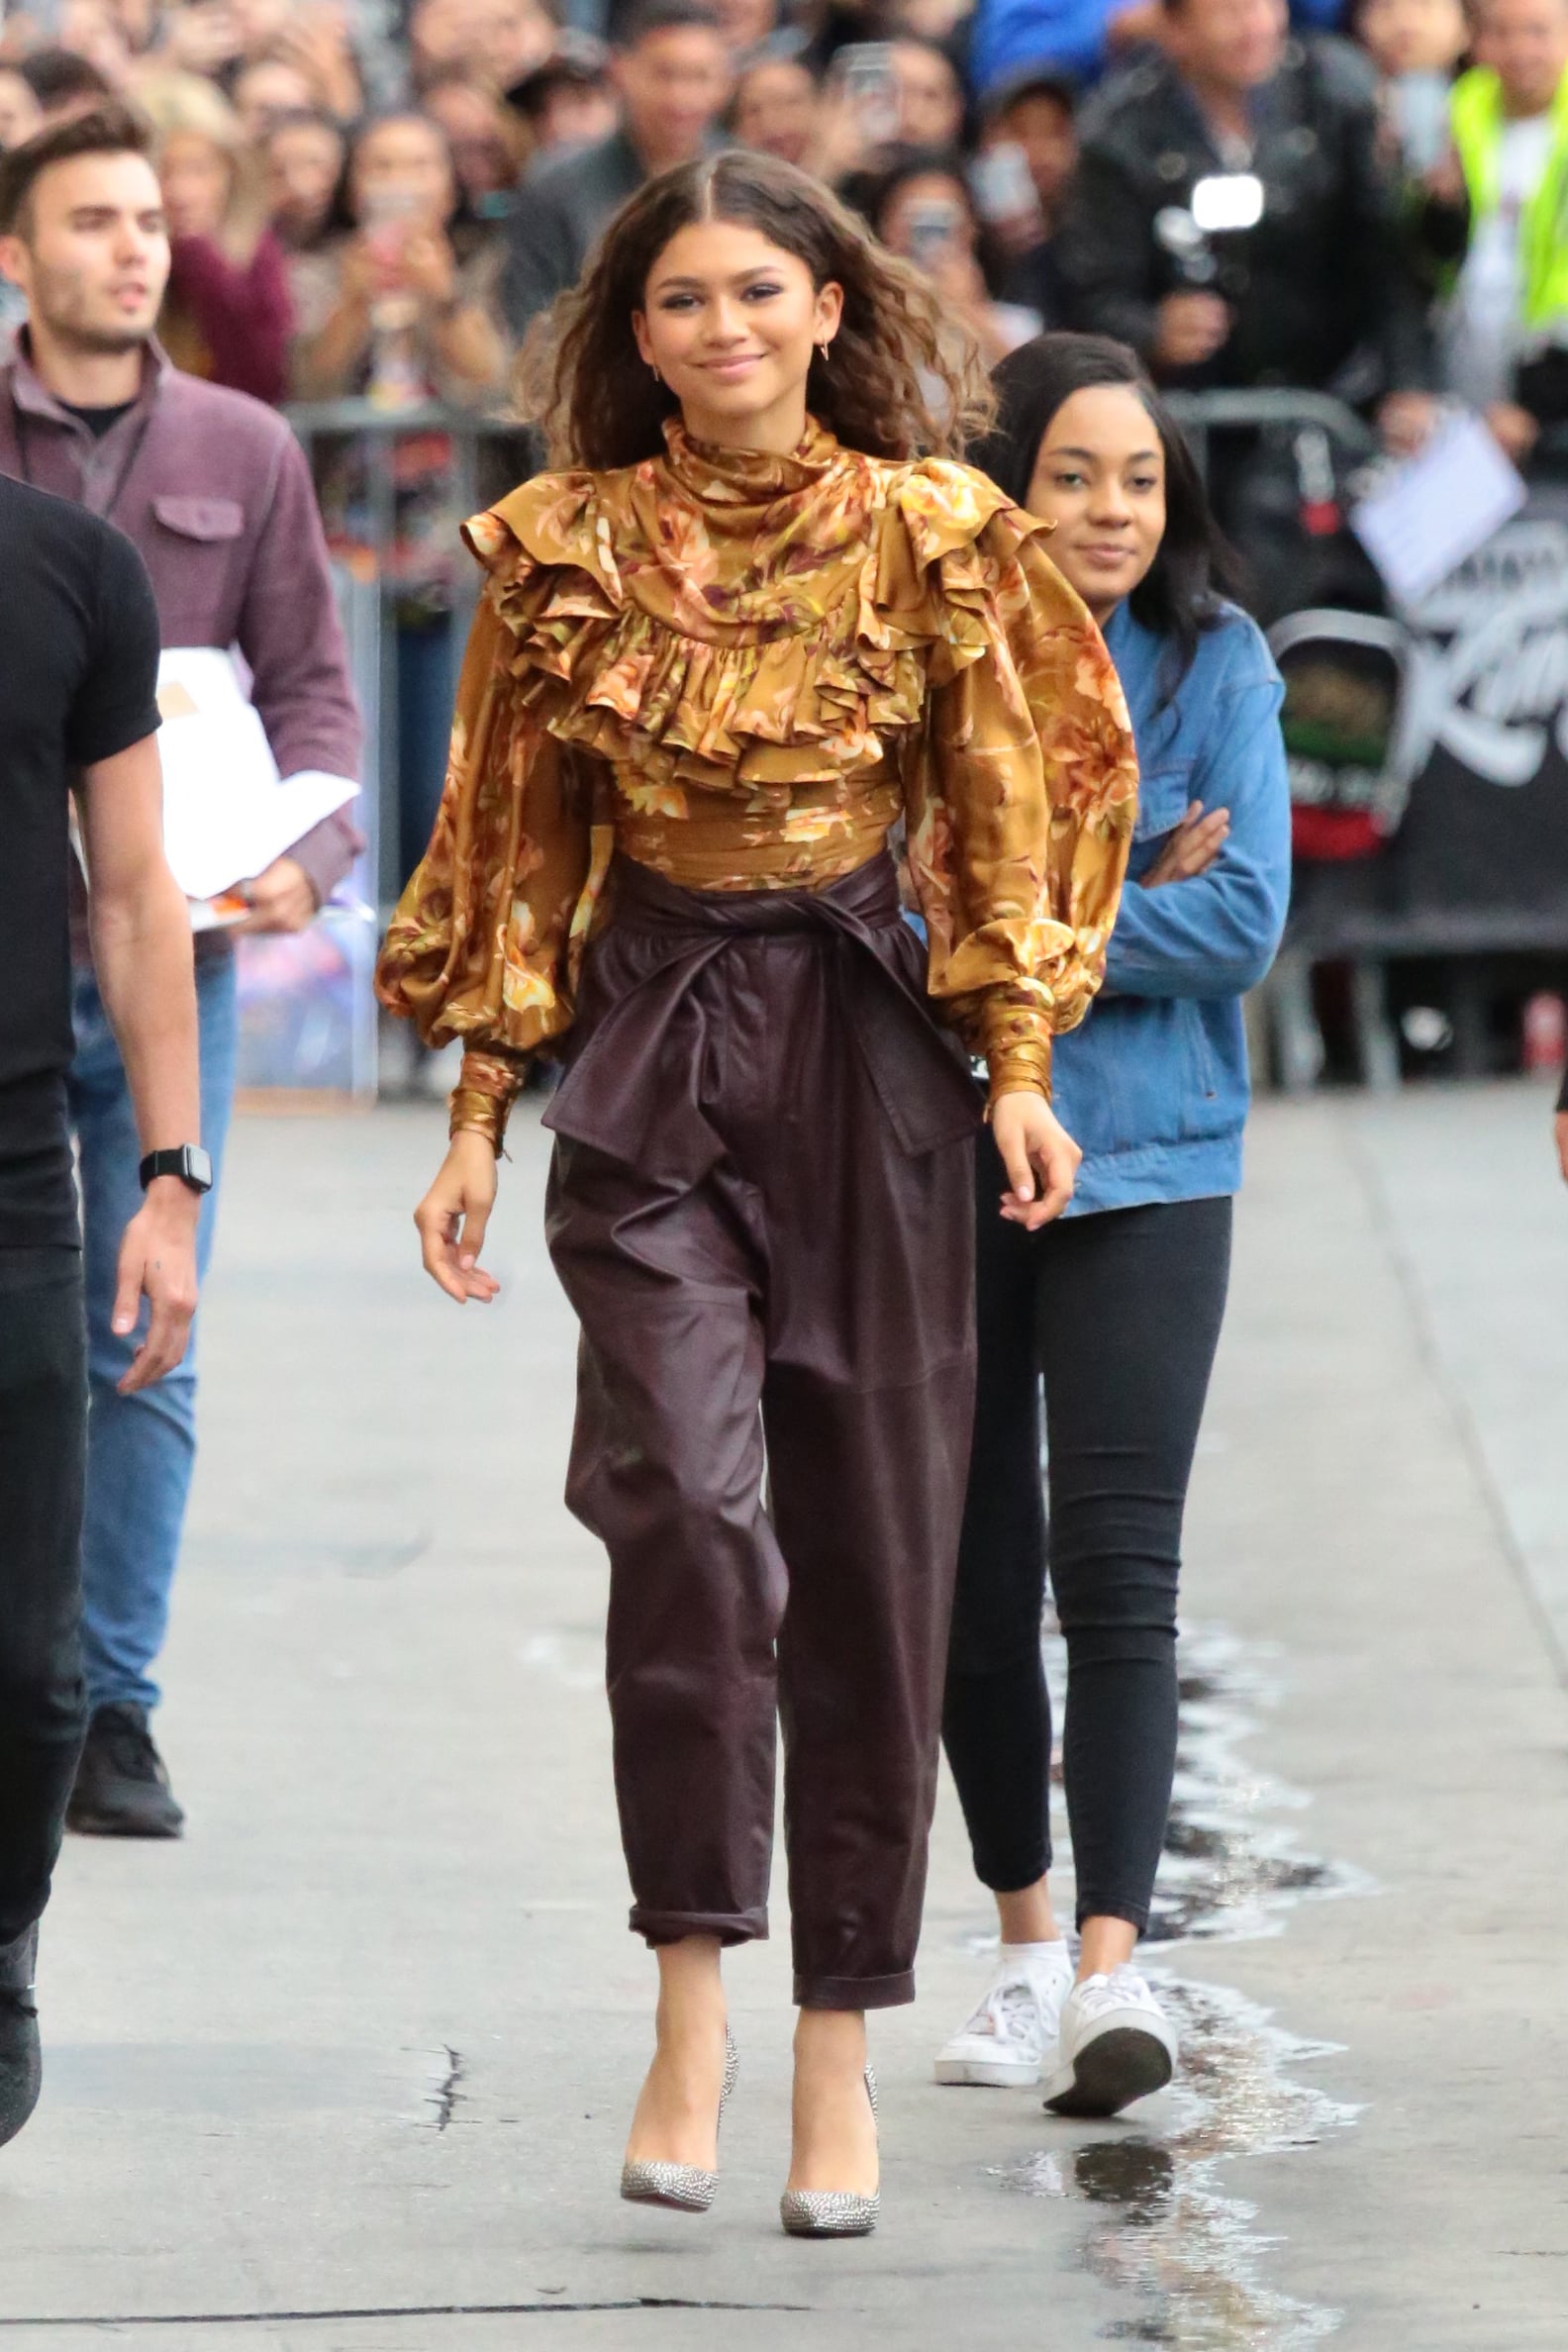 51 Awesome Celebrity Outfits to Recreate For 2020 | POPSUGAR Fashion